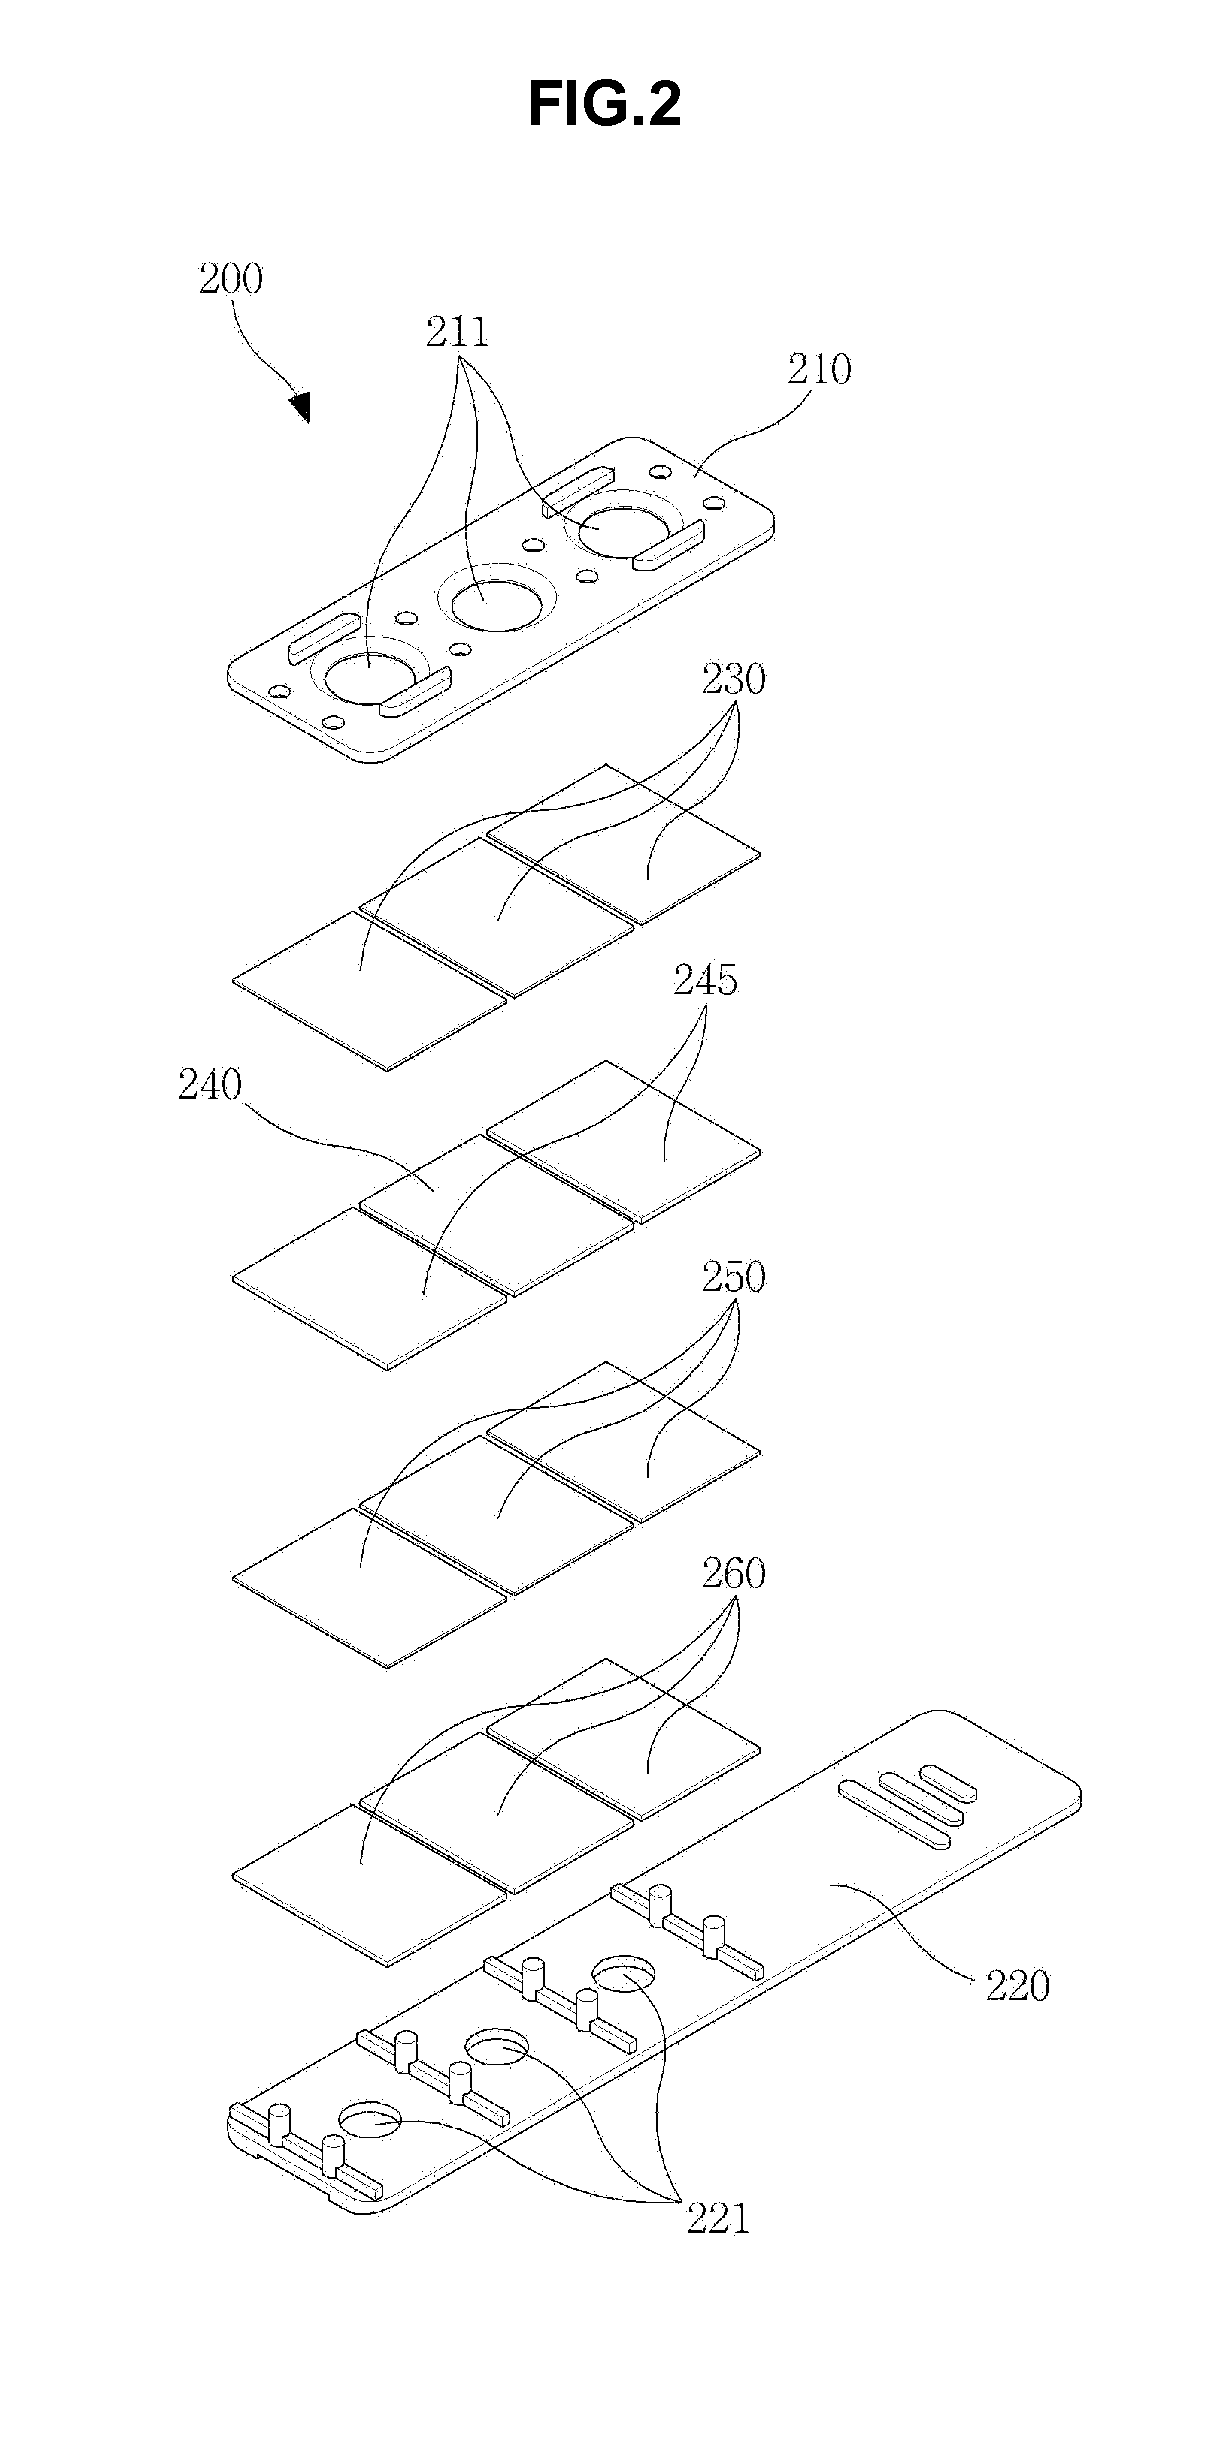 Test strip and method for measuring blood cholesterol level using the same